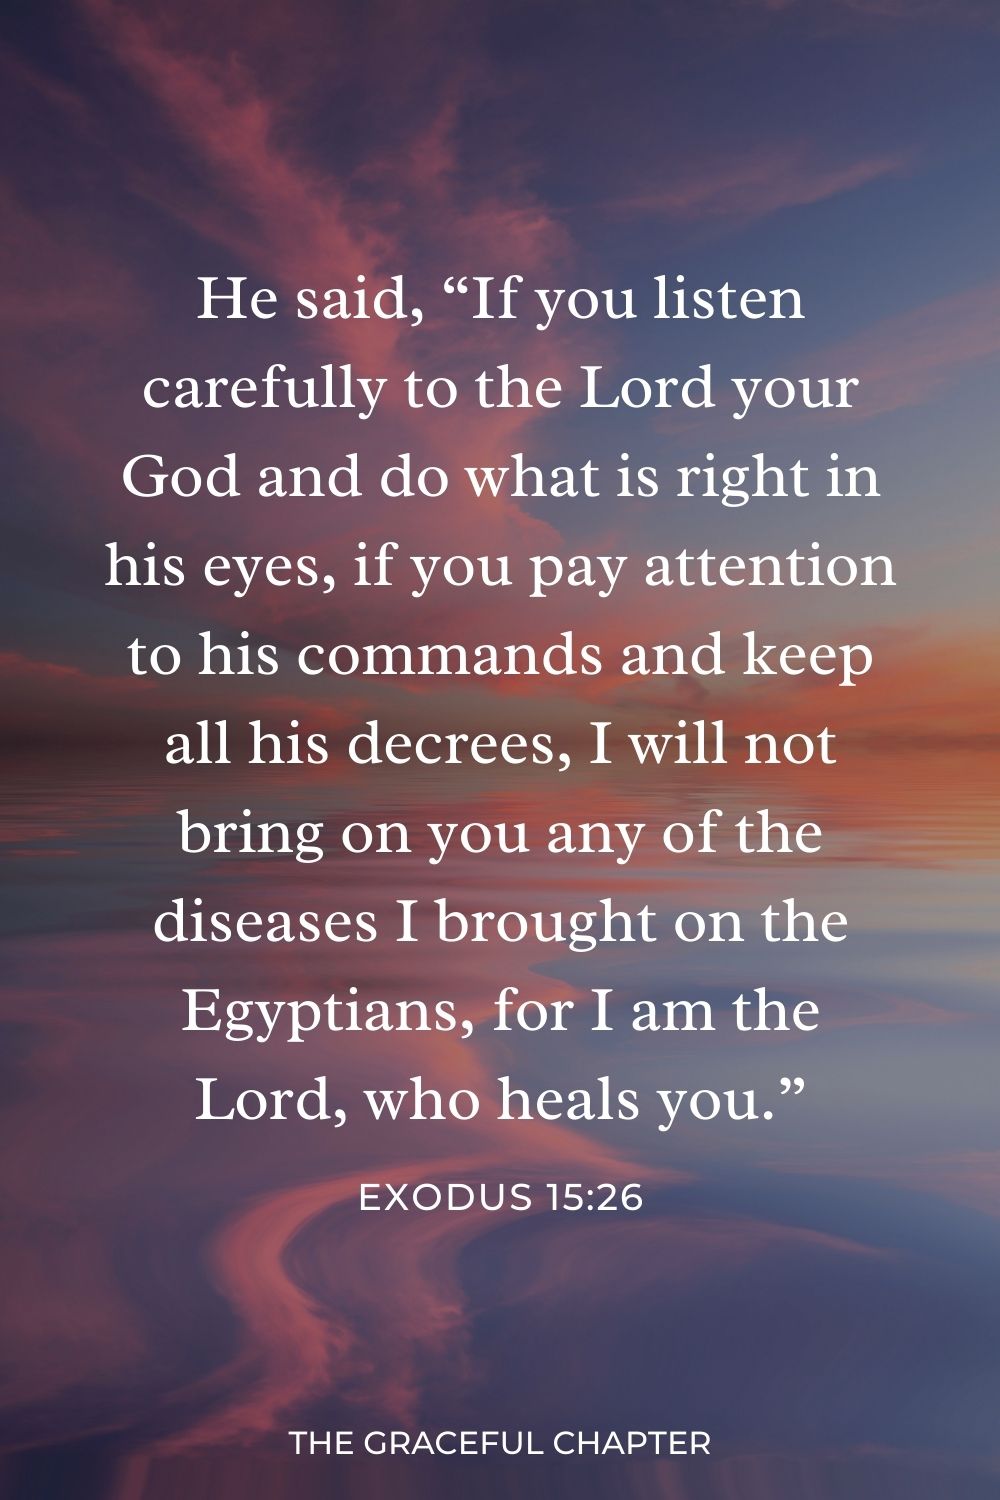 He said, “If you listen carefully to the Lord your God and do what is right in his eyes, if you pay attention to his commands and keep all his decrees, I will not bring on you any of the diseases I brought on the Egyptians, for I am the Lord, who heals you.” Exodus 15:26